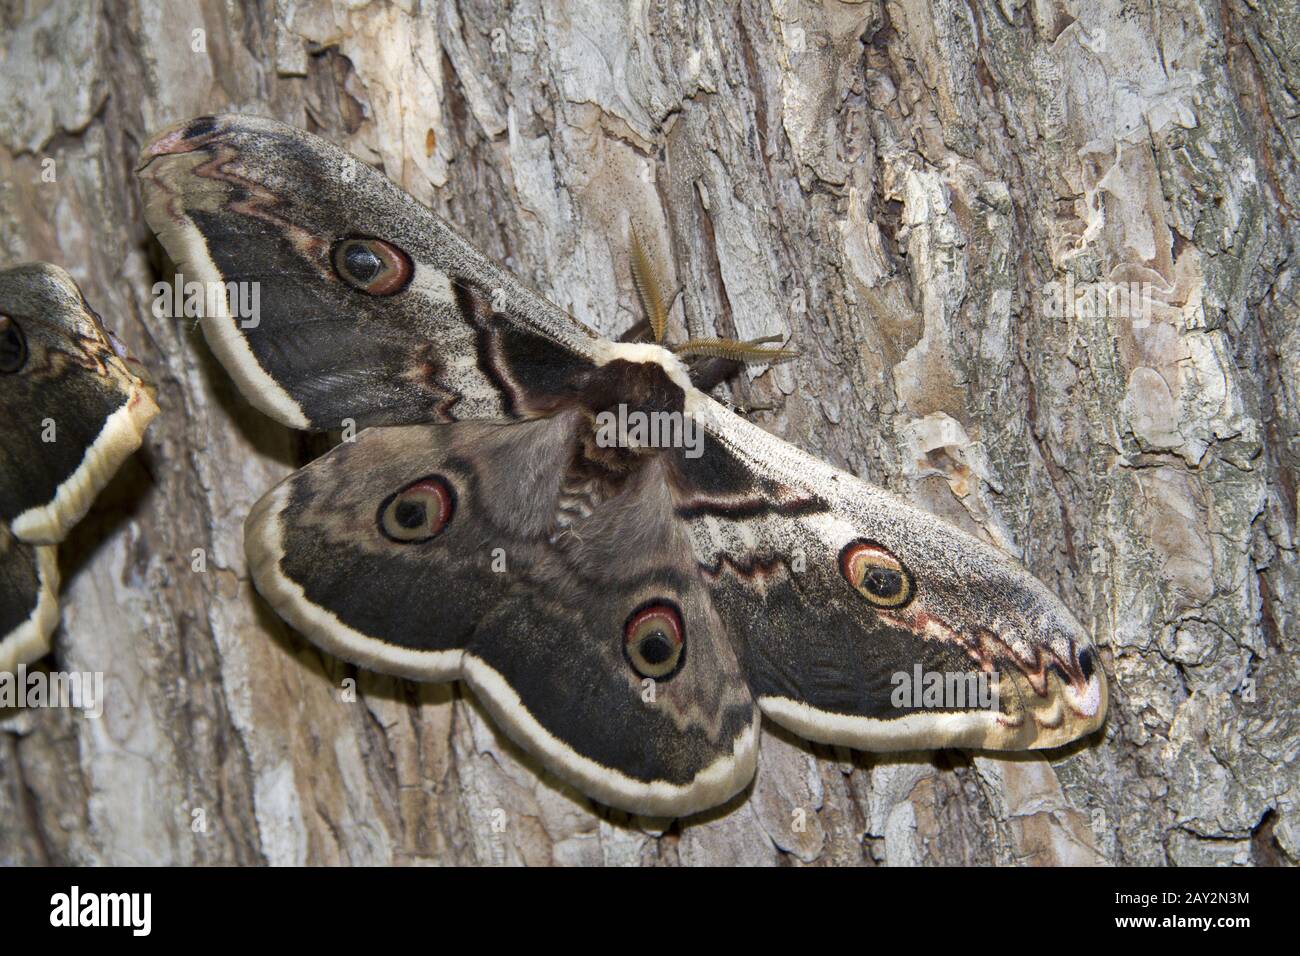 Great Peacock Moth or Giant Emperor Moth. Stock Photo